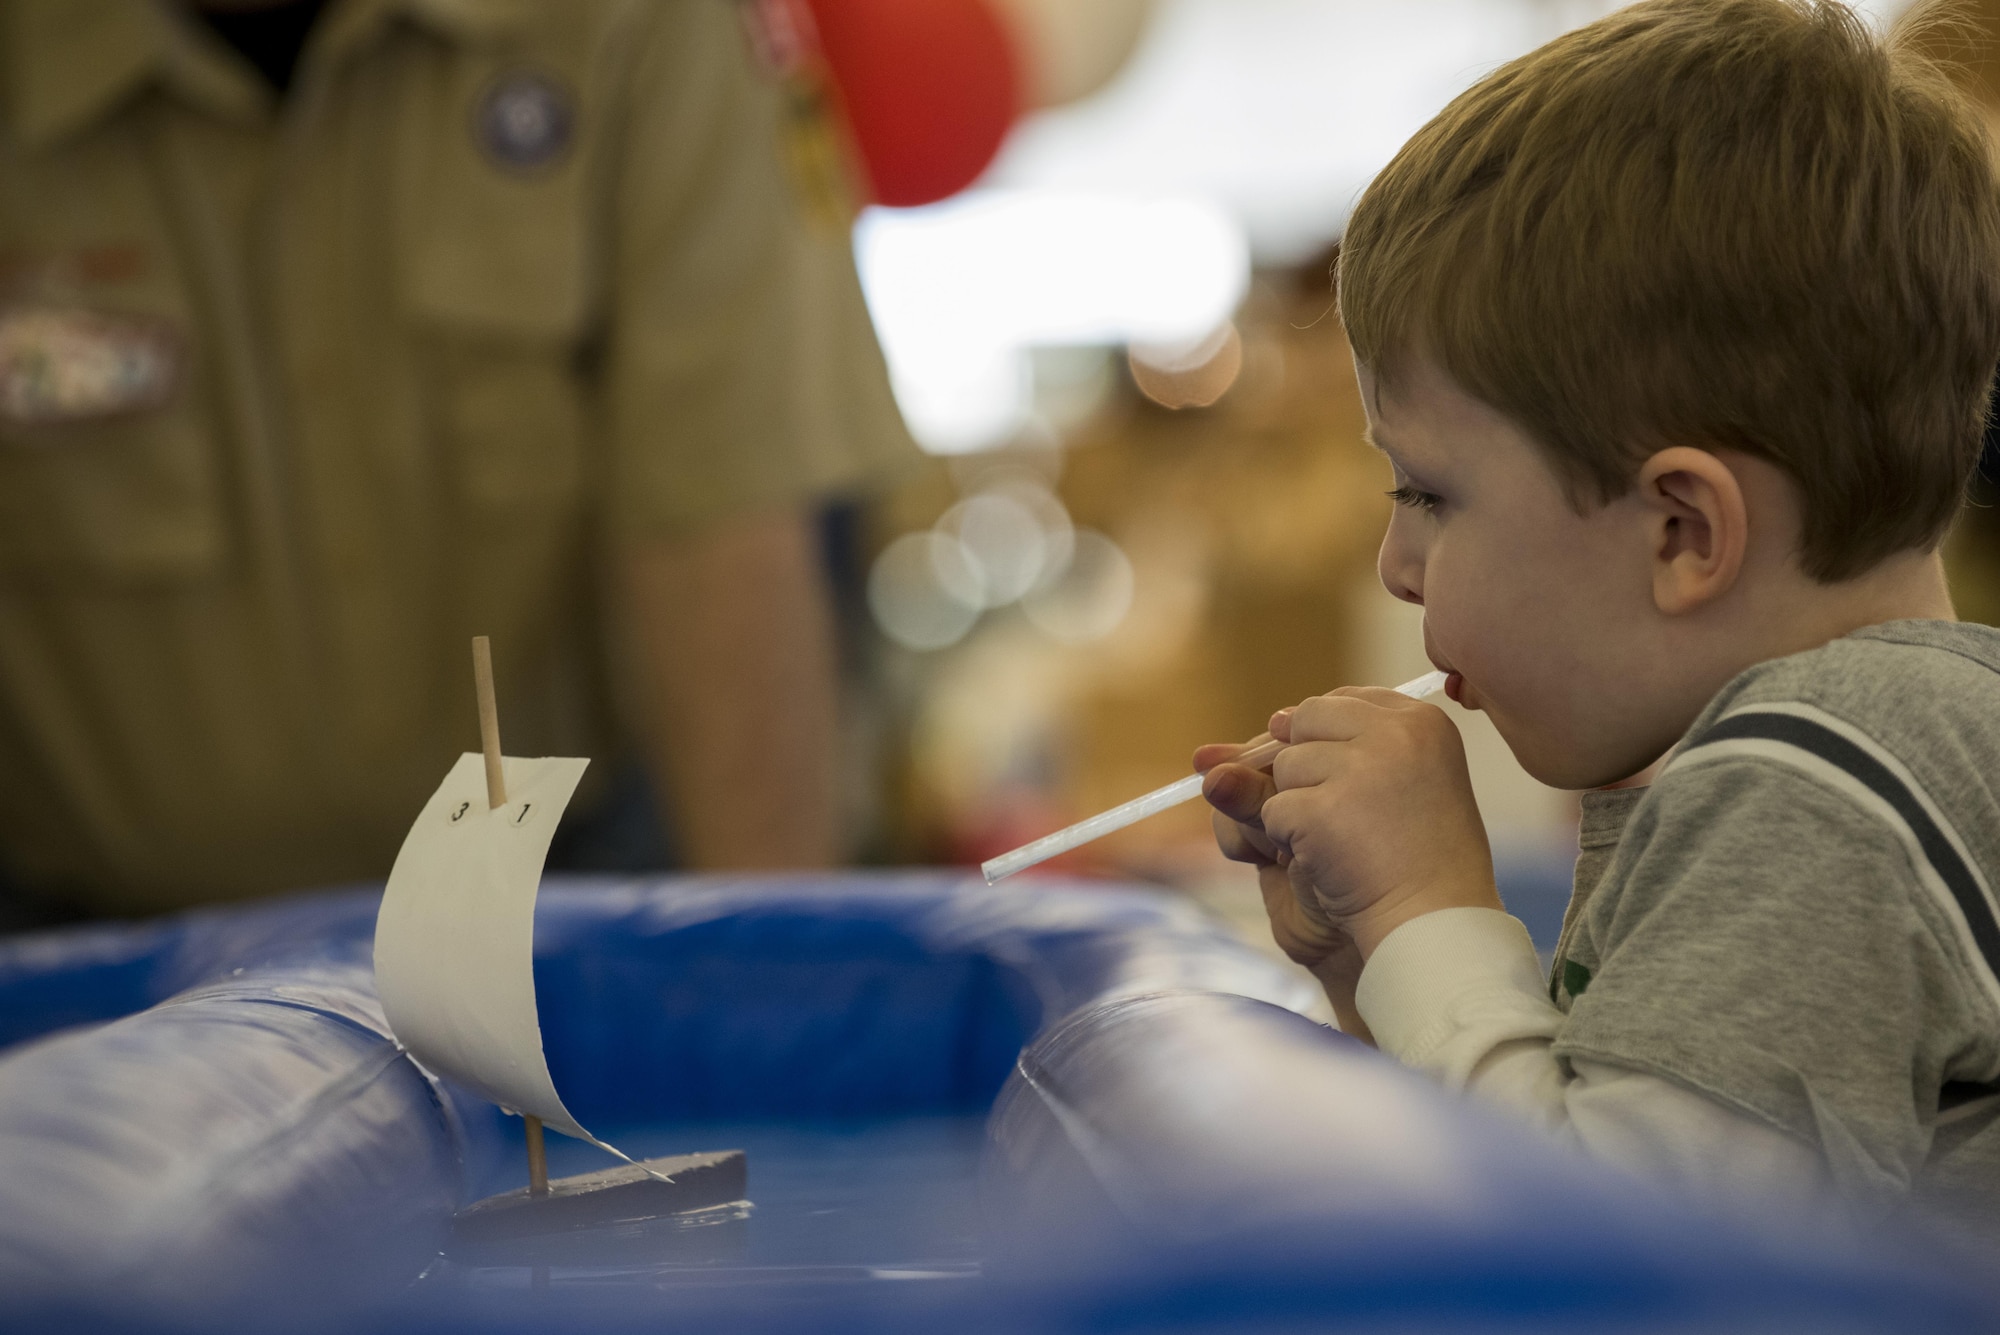 A Spangdahlem child uses a straw to propel a toy boat during the fourth annual Spring Fling event in the Base Exchange at Spangdahlem Air Base, Germany, April 14, 2017. The event was held to bring awareness to the Exceptional Family Member Program and included various activities for children such as face painting, craft making, a bouncing castle and boat races. (U.S. Air Force photo by Airman 1st Class Preston Cherry)